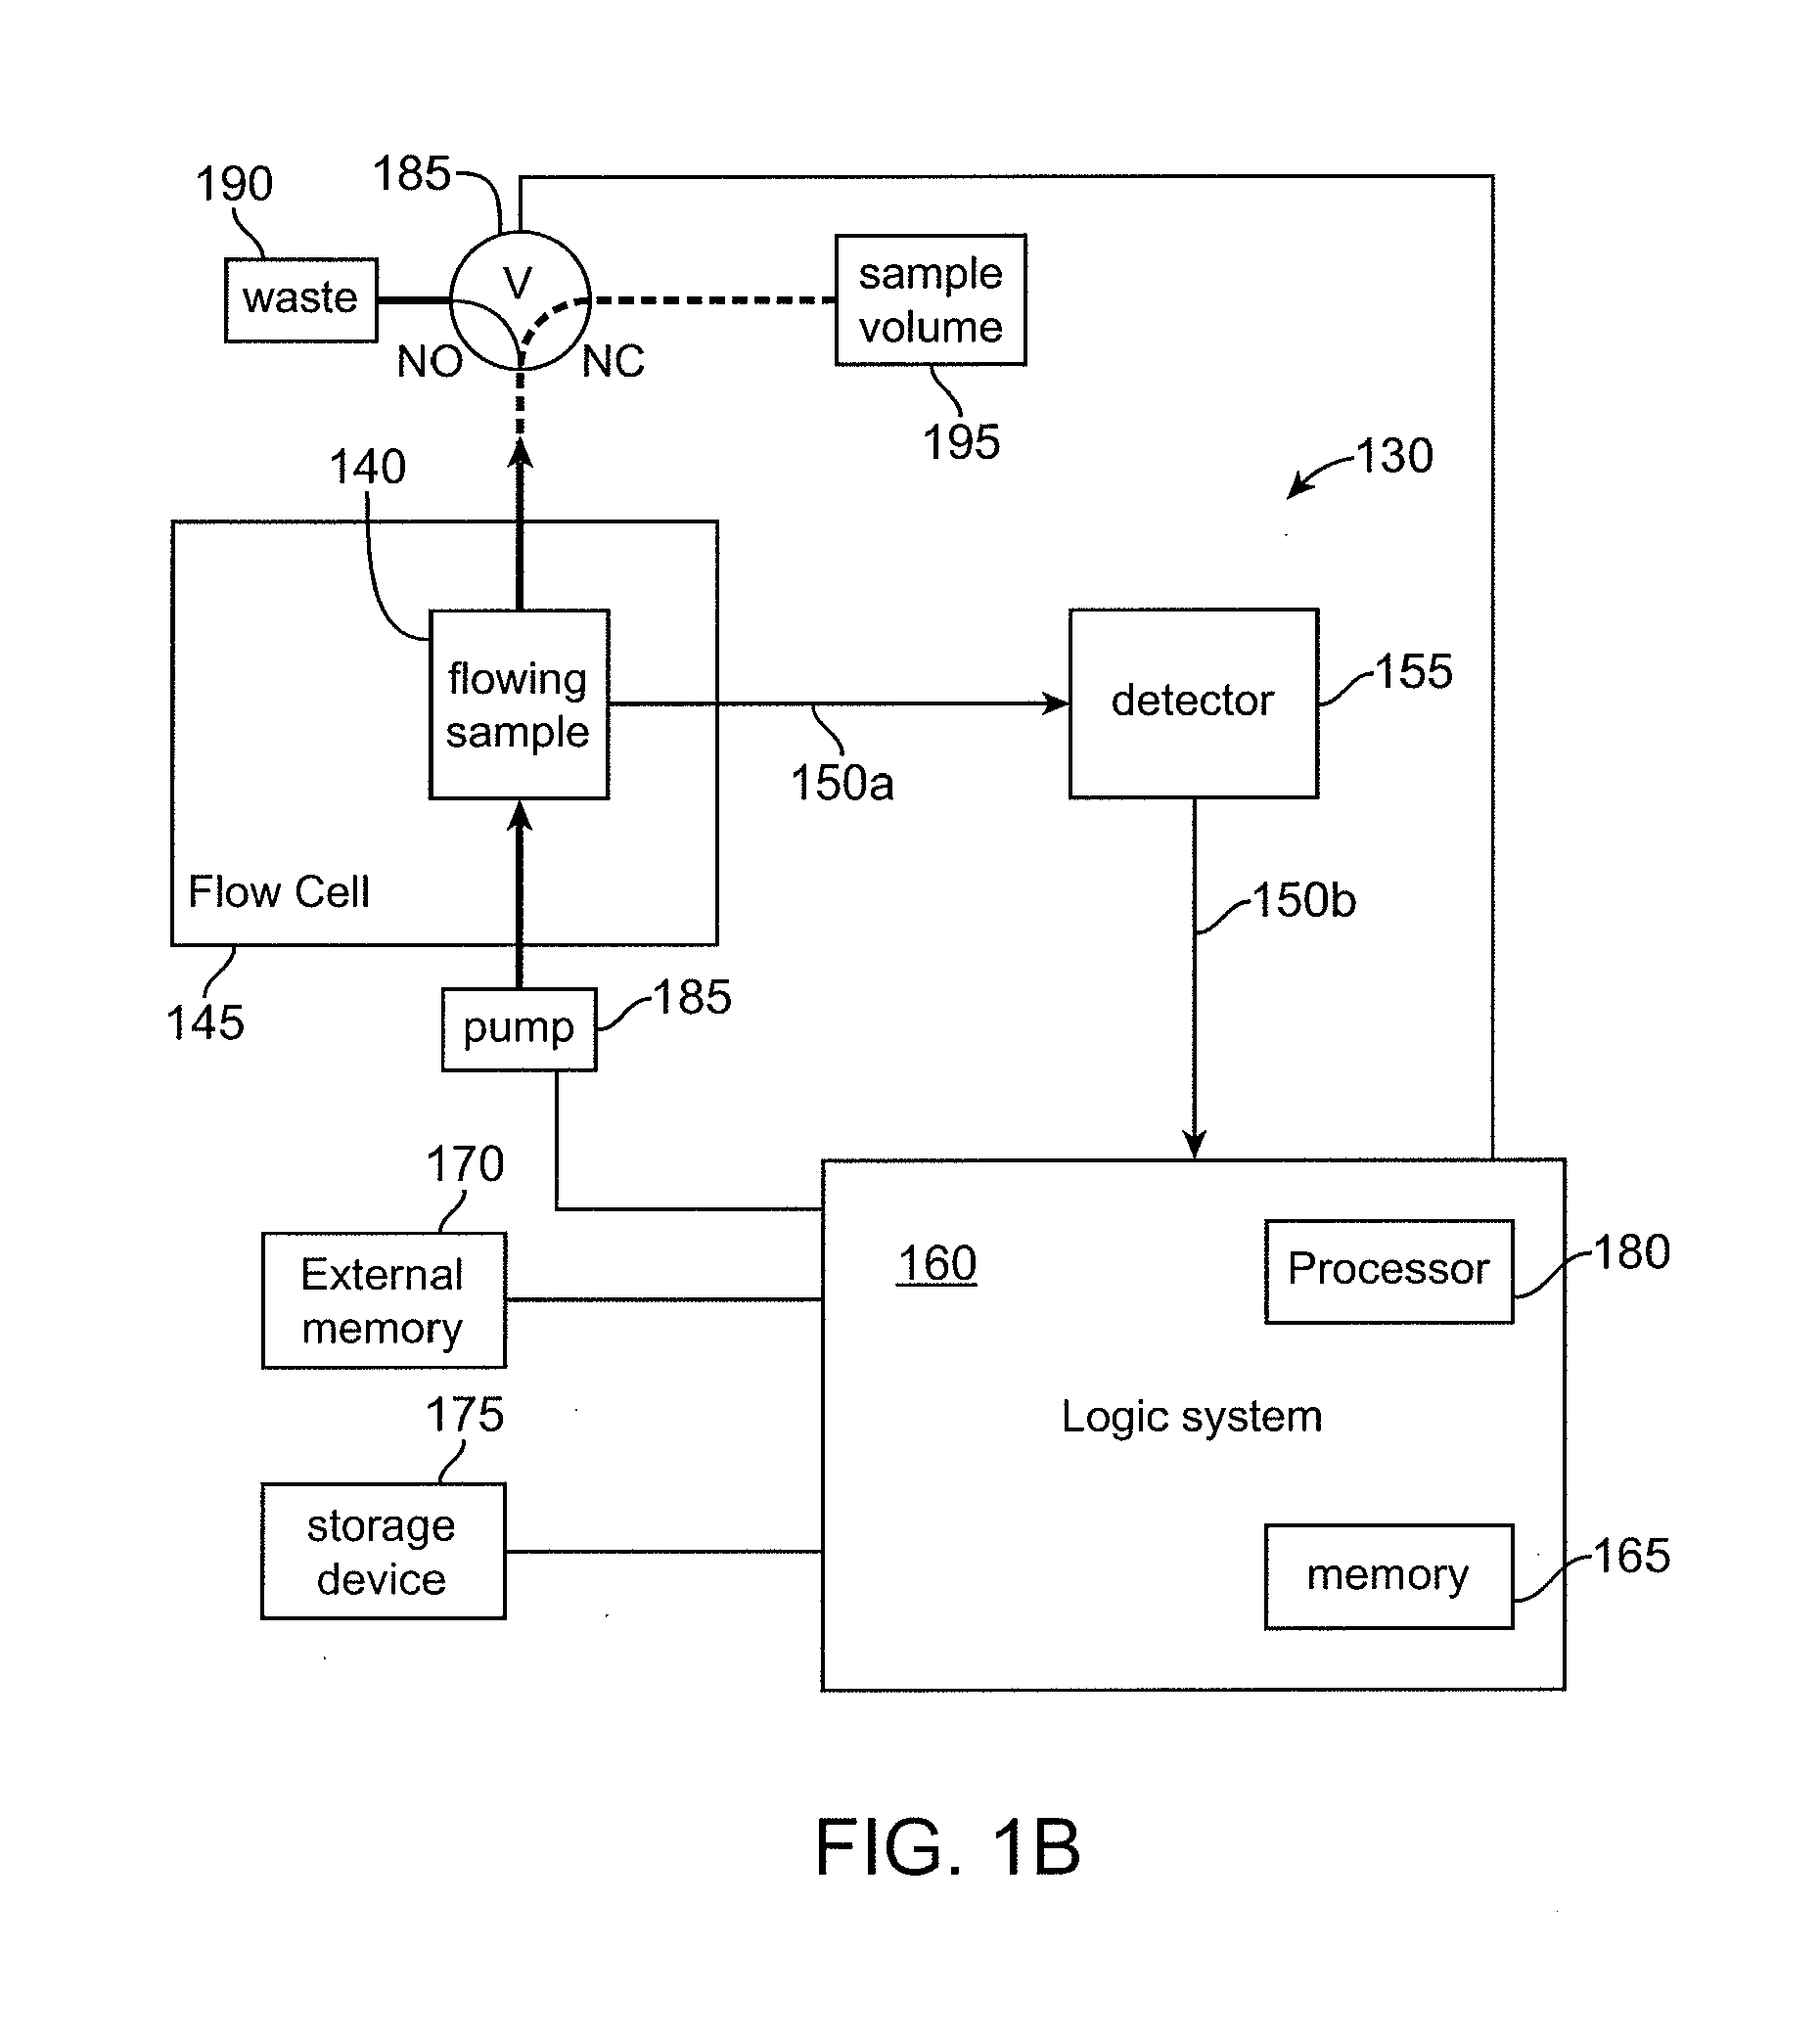 Measuring multi-analyte samples using an in-line flow cell